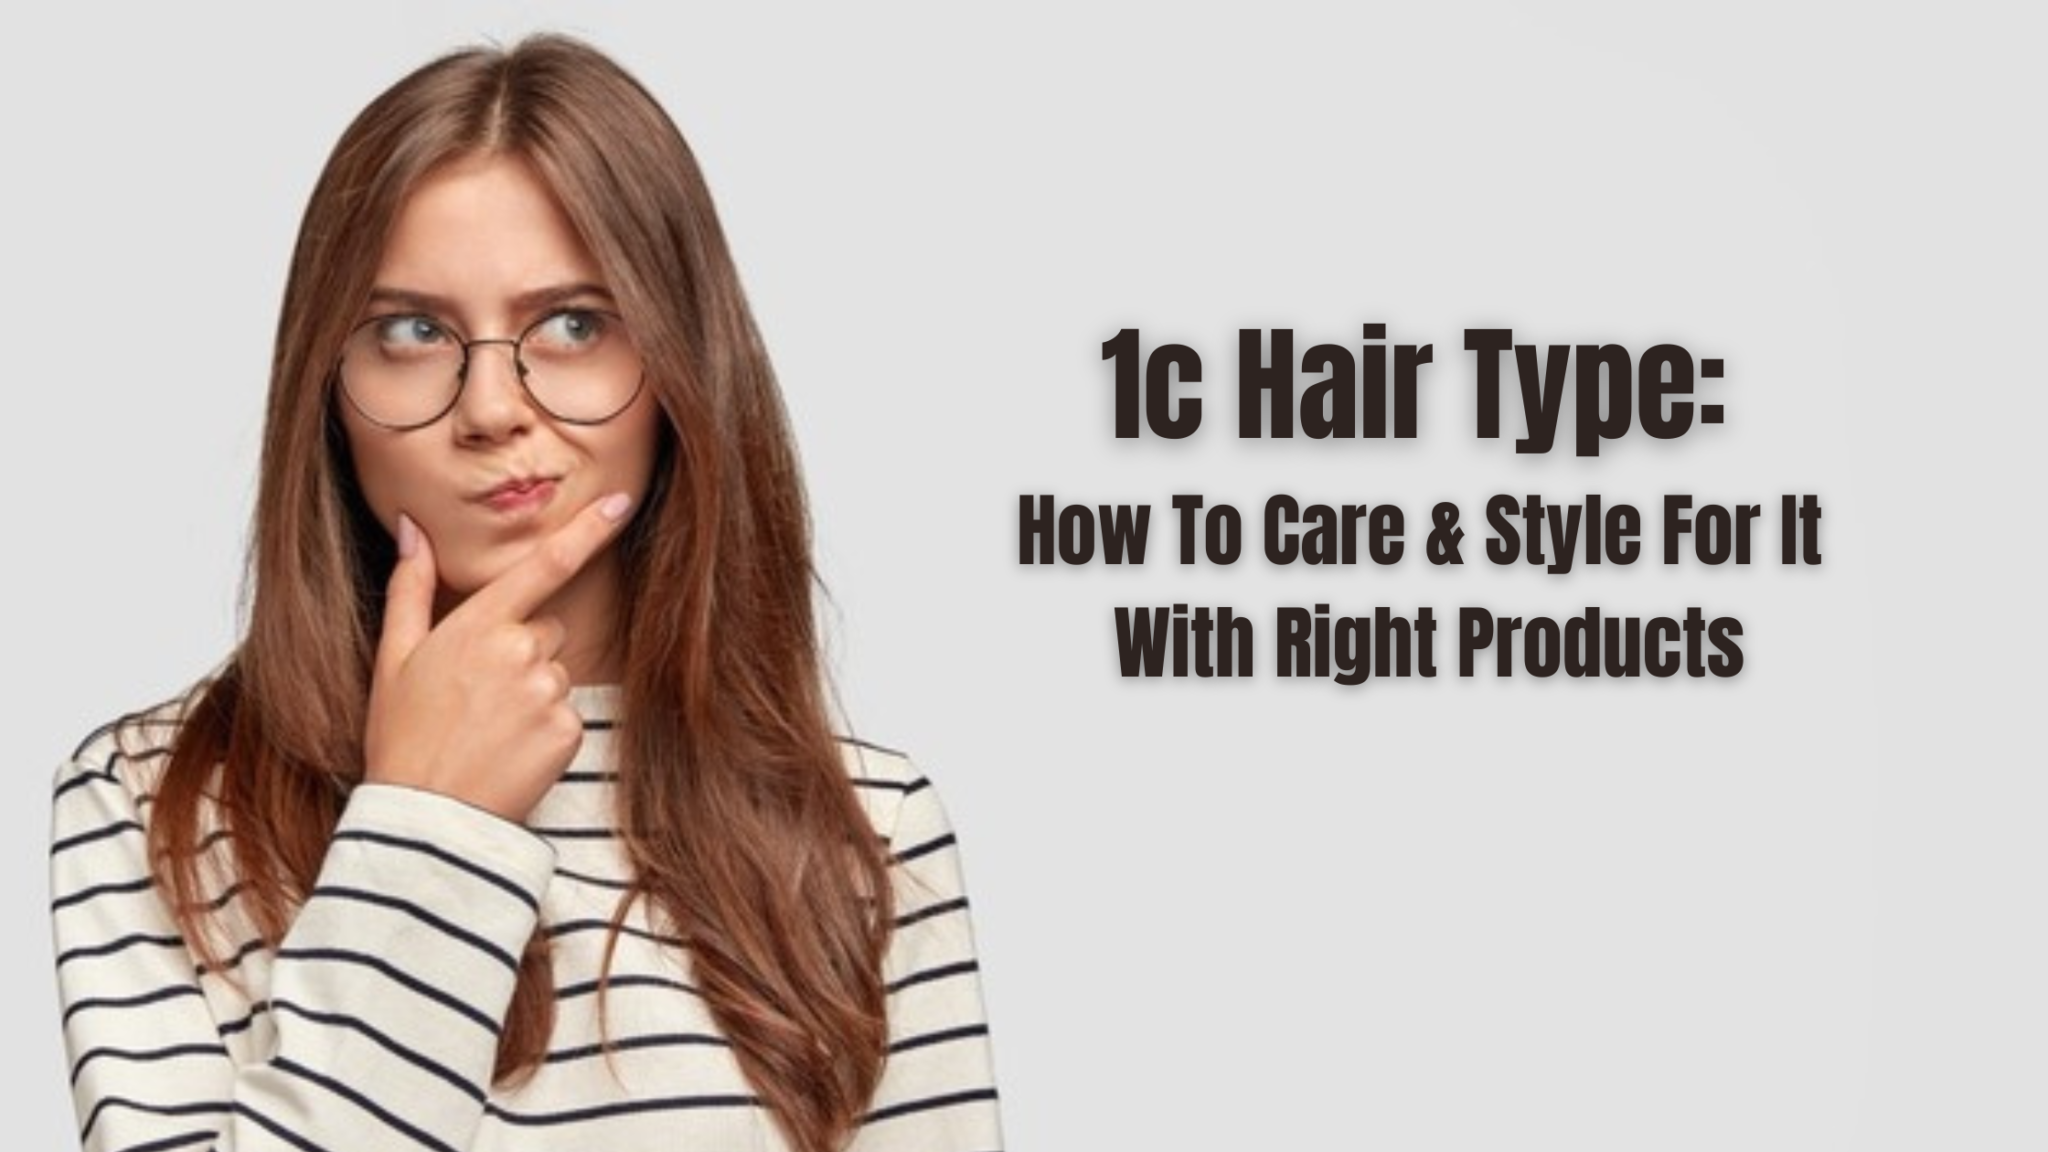 1c Hair Type: How To Care & Style It With Right Products